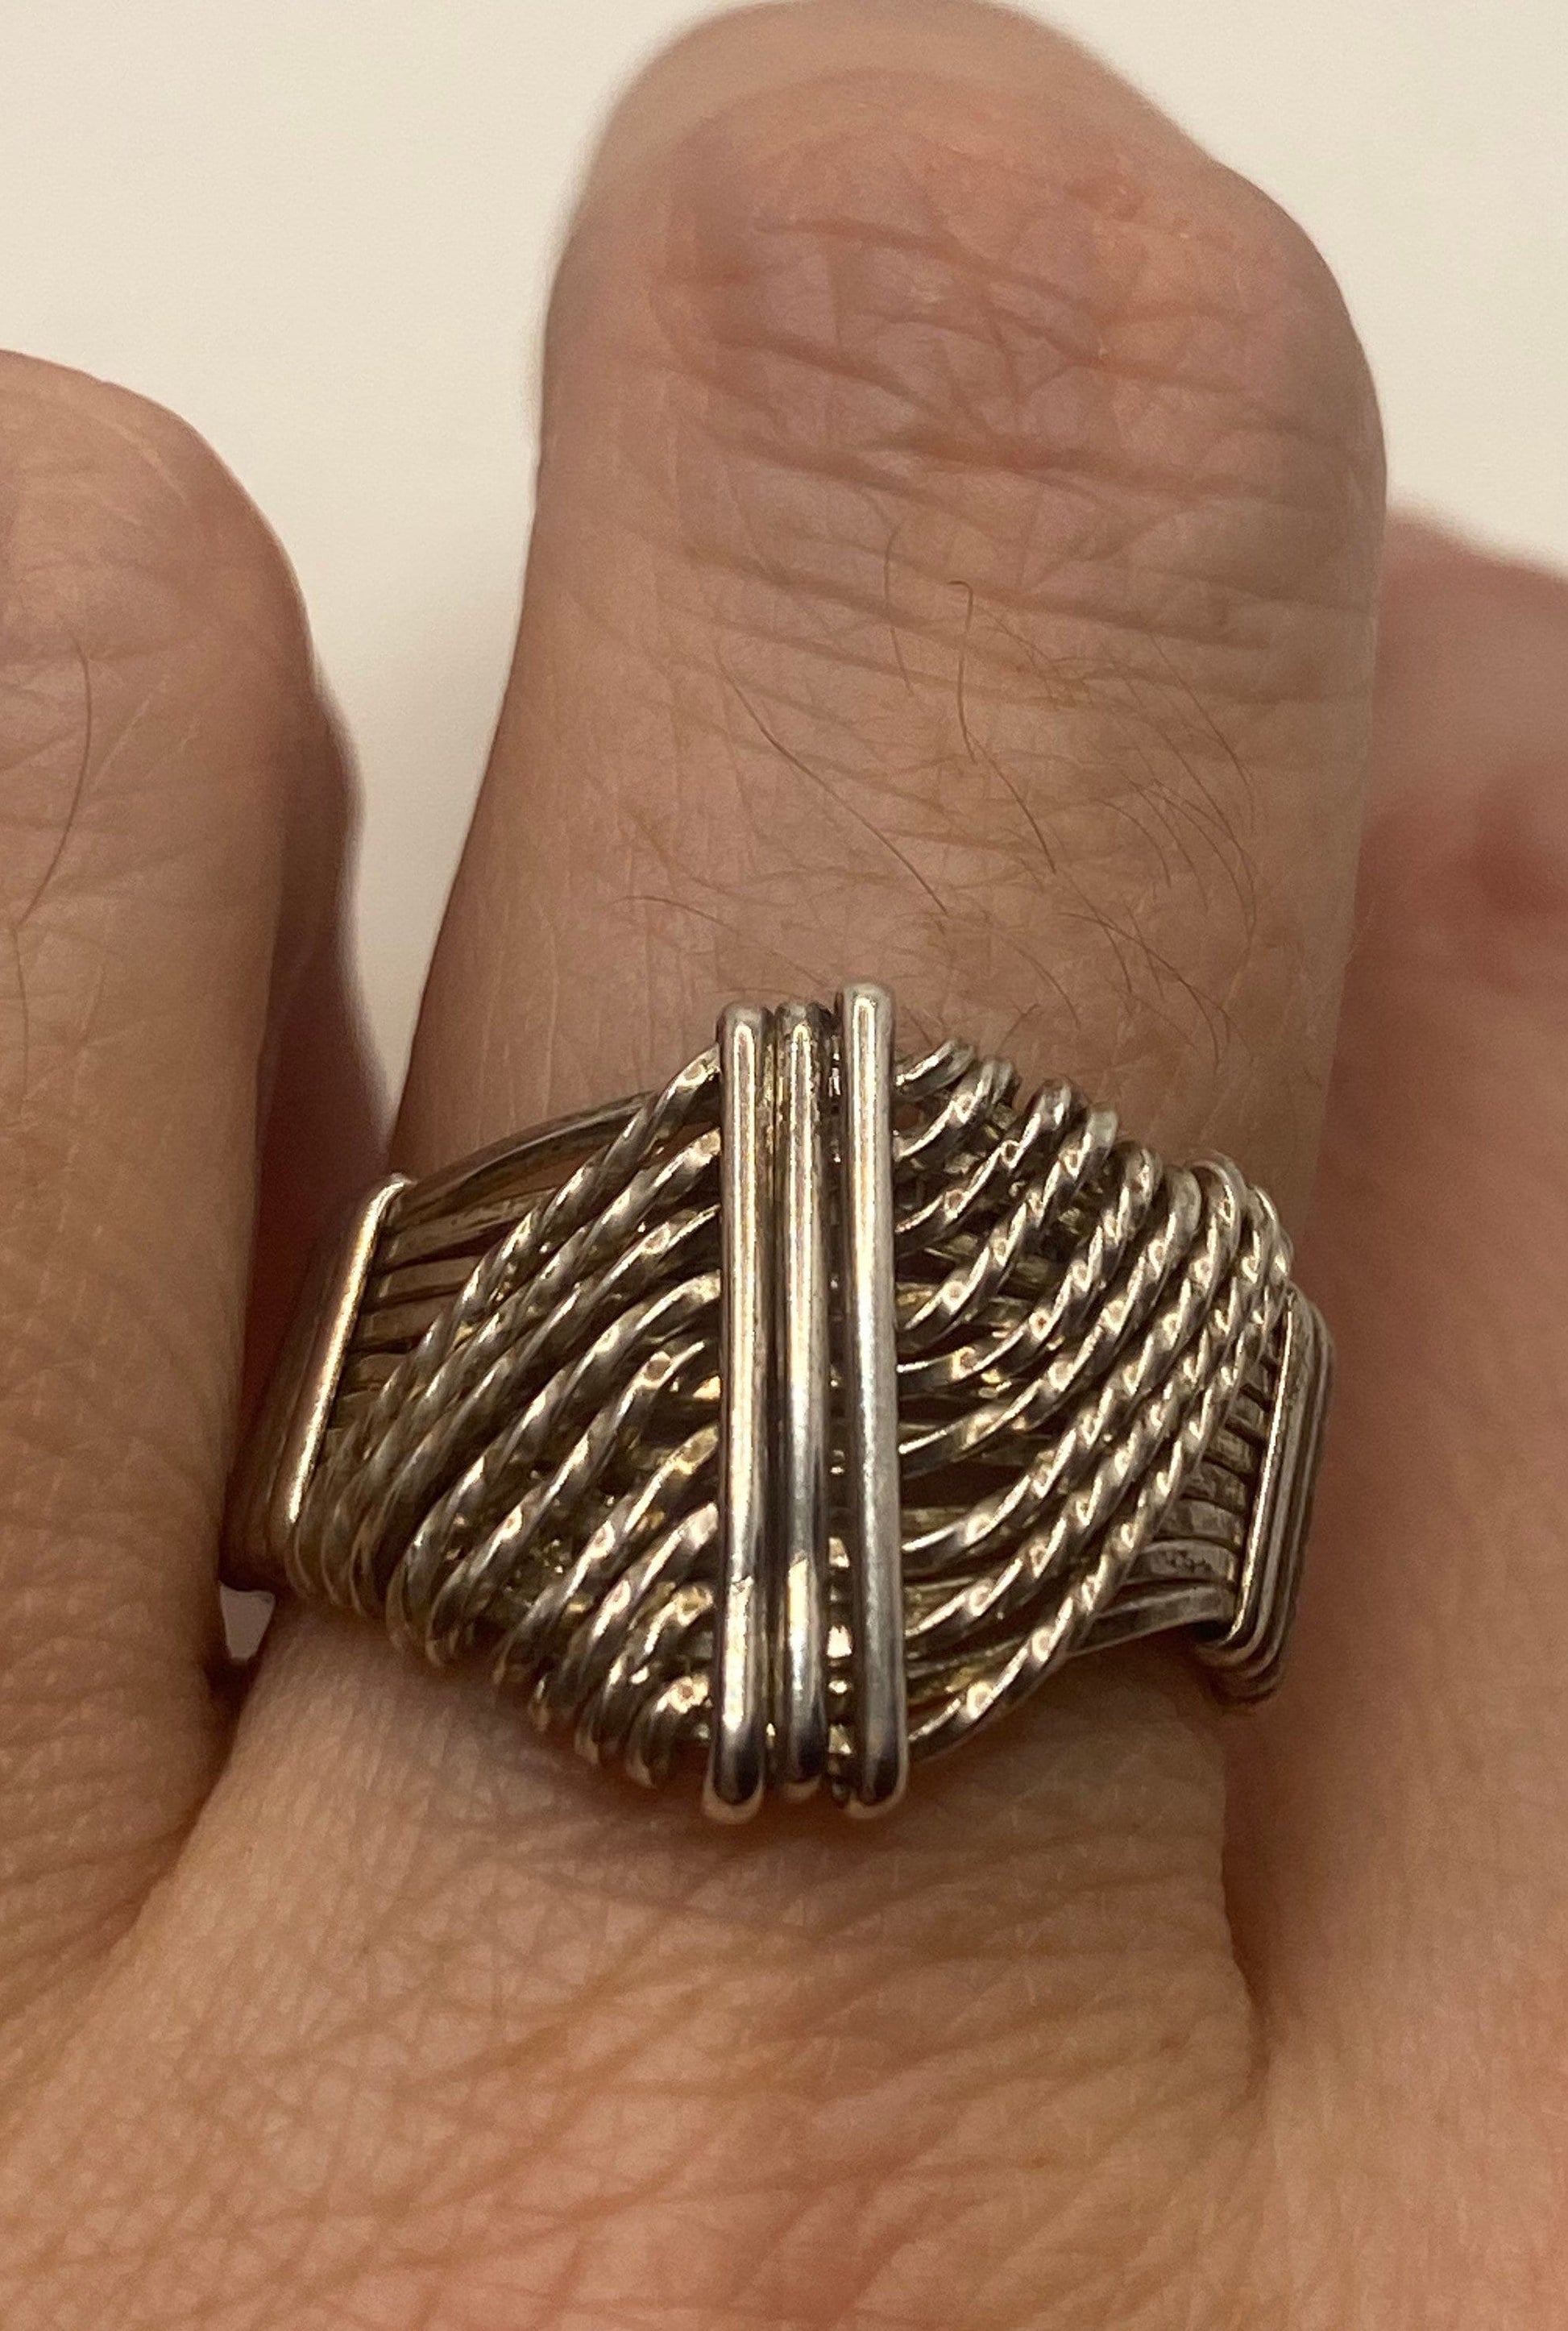 Vintage 925 Sterling Silver Wrapped Wire Ring